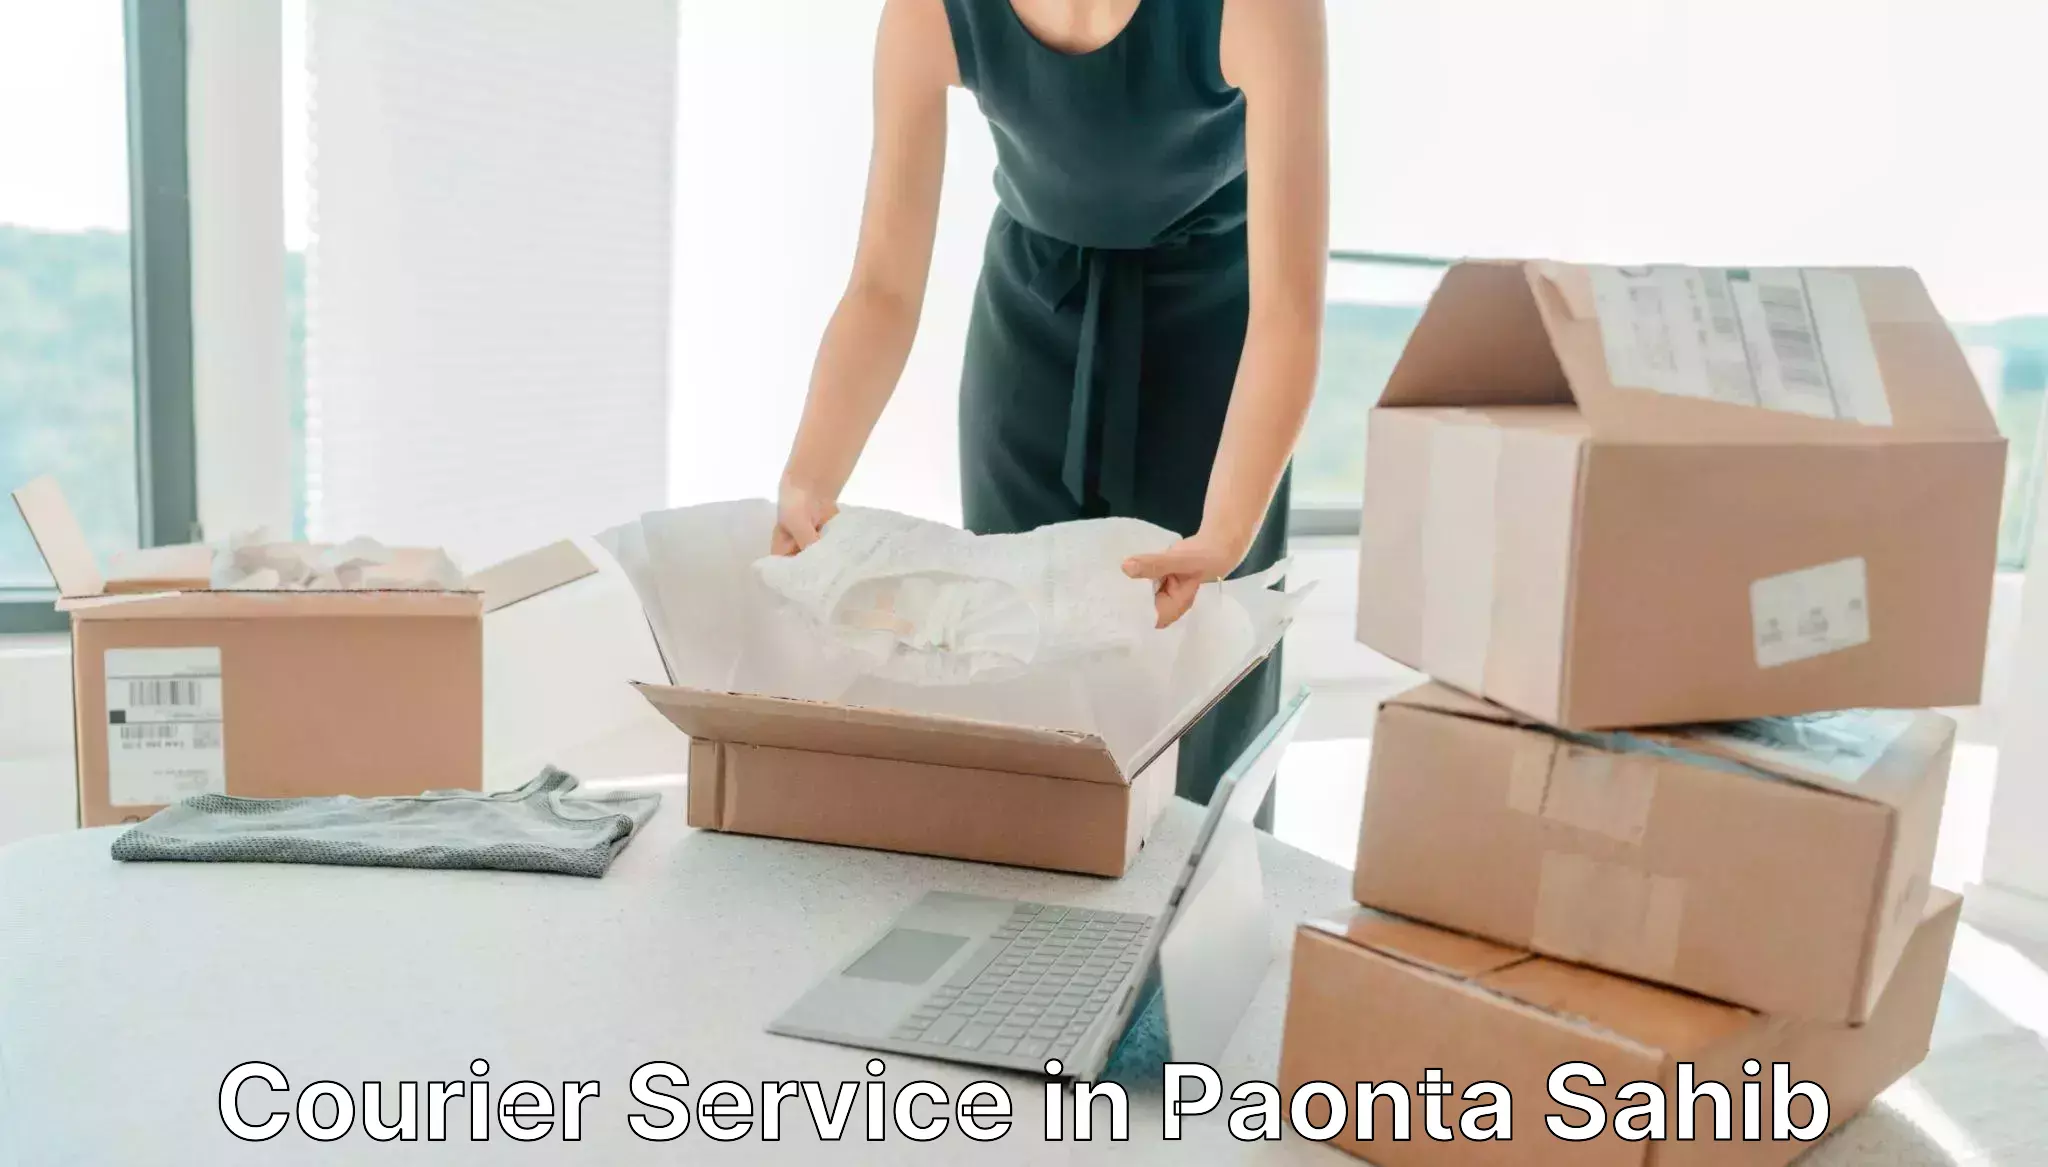 Personalized courier experiences in Paonta Sahib